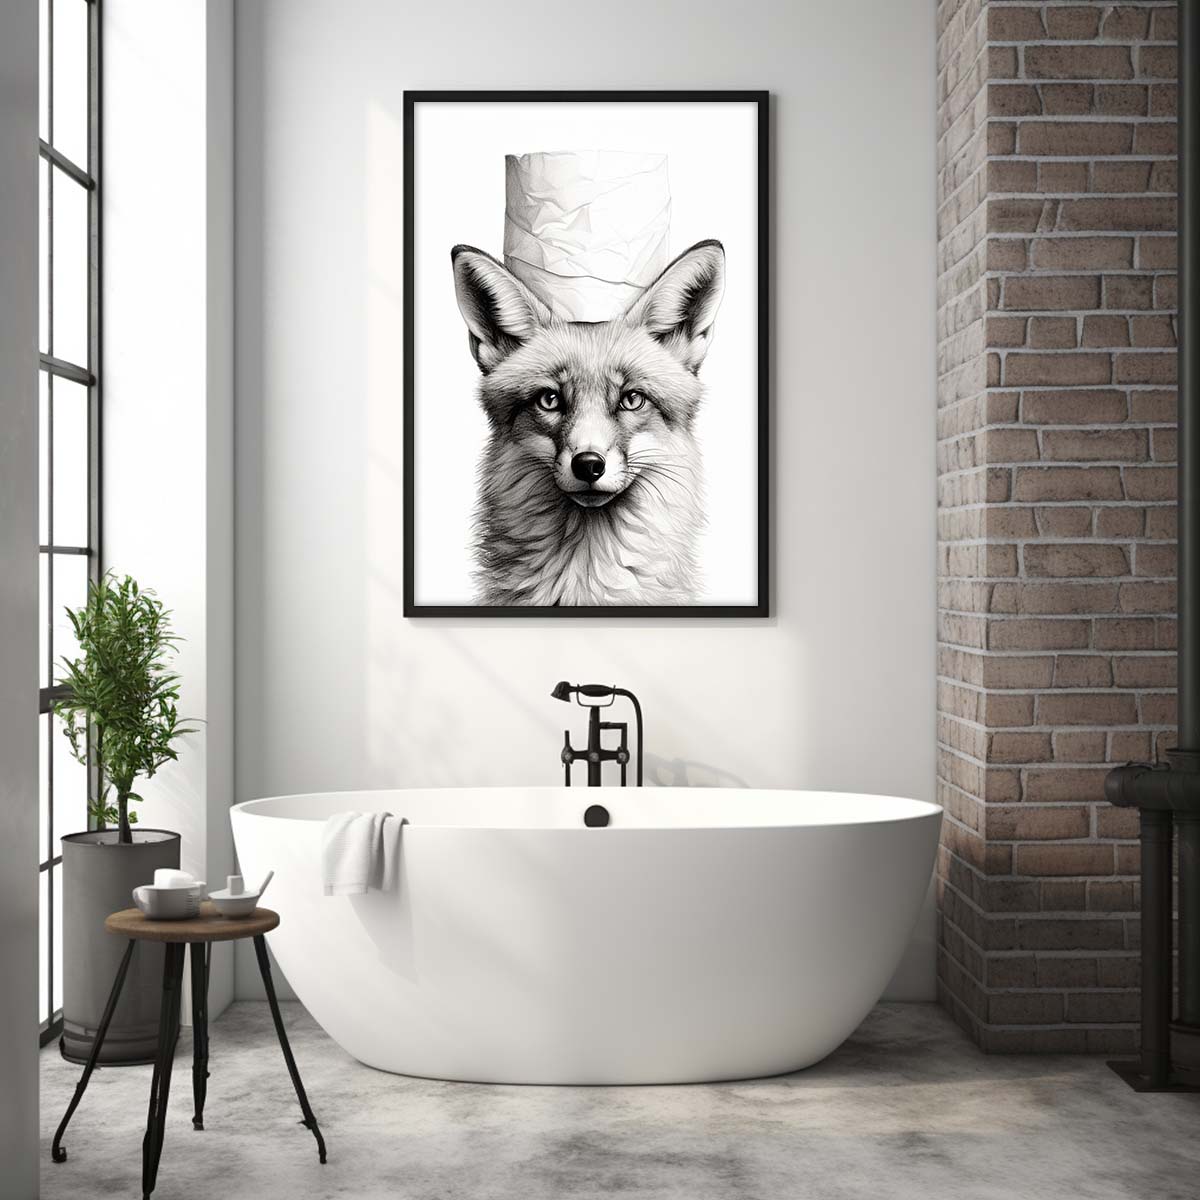 Cute Fox With Toilet Paper, Canvas Or Poster, Funny Fox Art, Bathroom Wall Decor, Home Decor, Bathroom Wall Art, Fox Wall Decor, Animal Decor, Animal Gift, Animal Illustration, Digital Download